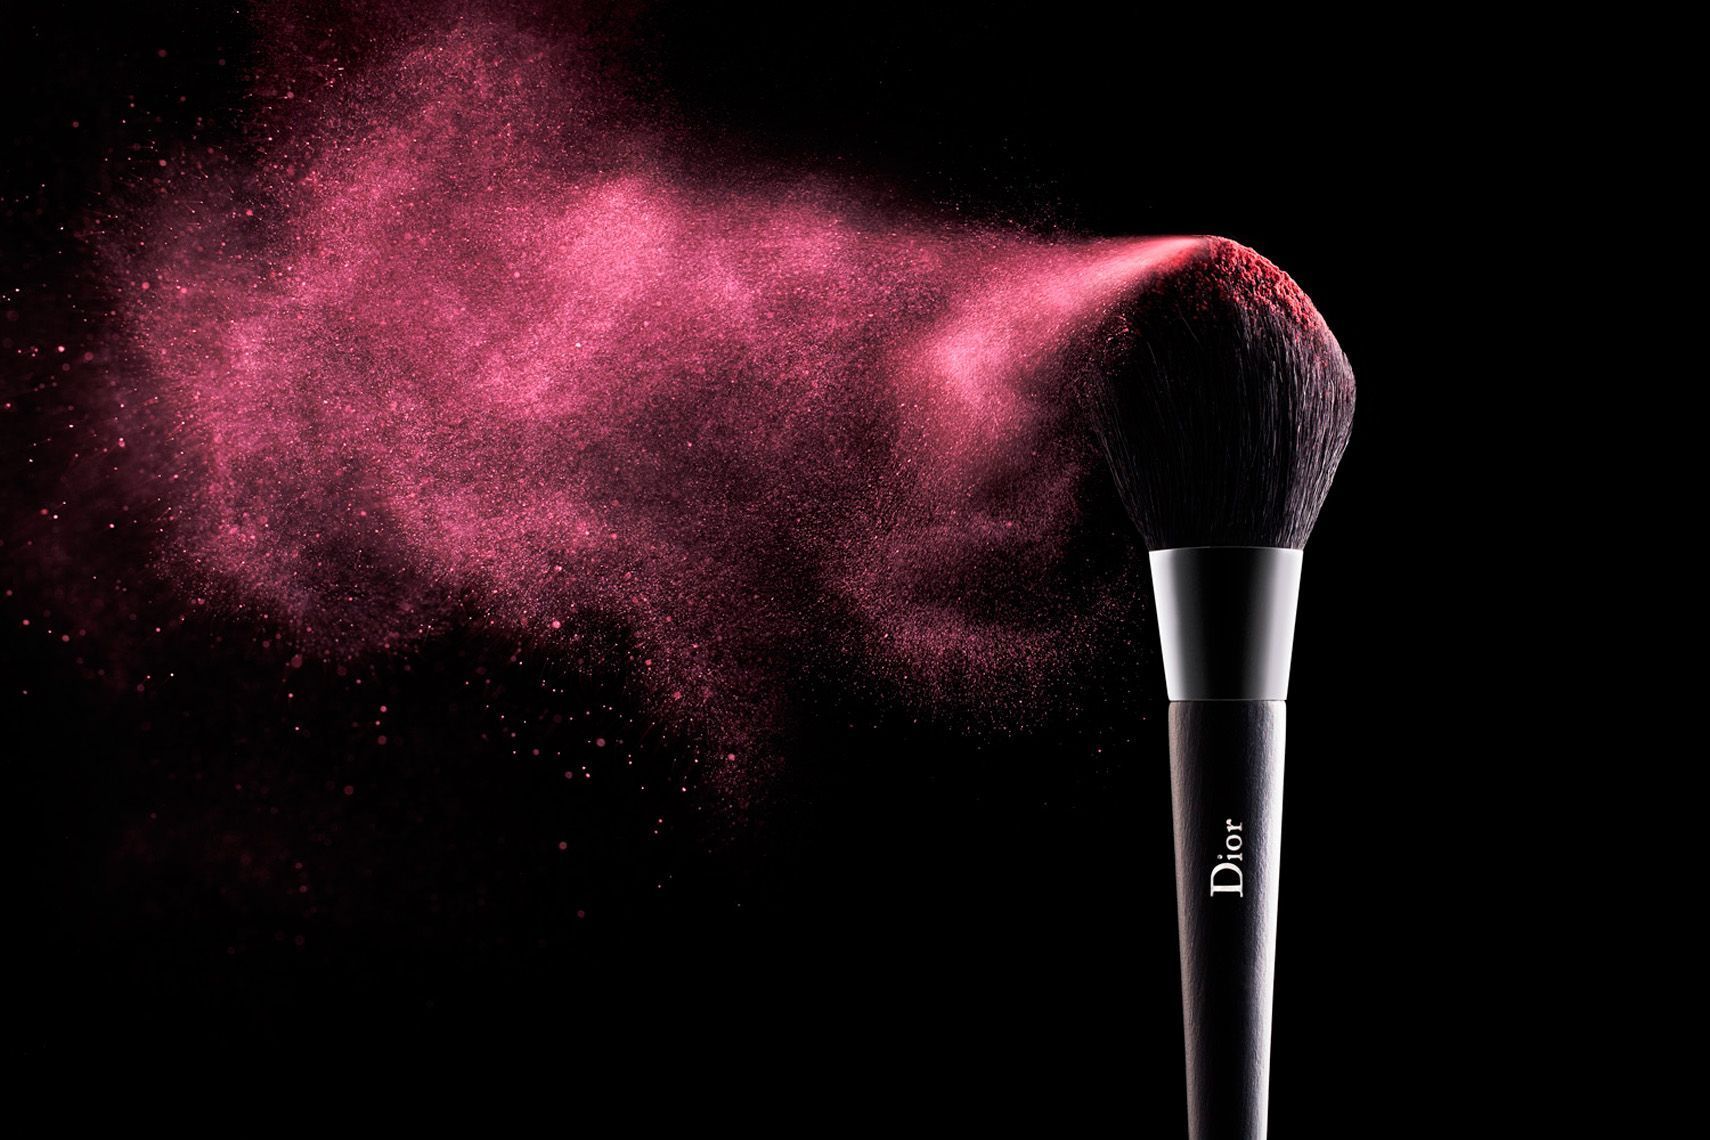 Free download Makeup Brushes Wallpaper Top Free Makeup Brushes Background [1710x1140] for your Desktop, Mobile & Tablet. Explore Makeup Background. Cute Makeup Wallpaper, Makeup Wallpaper for Desktop, Makeup Wallpaper Tumblr